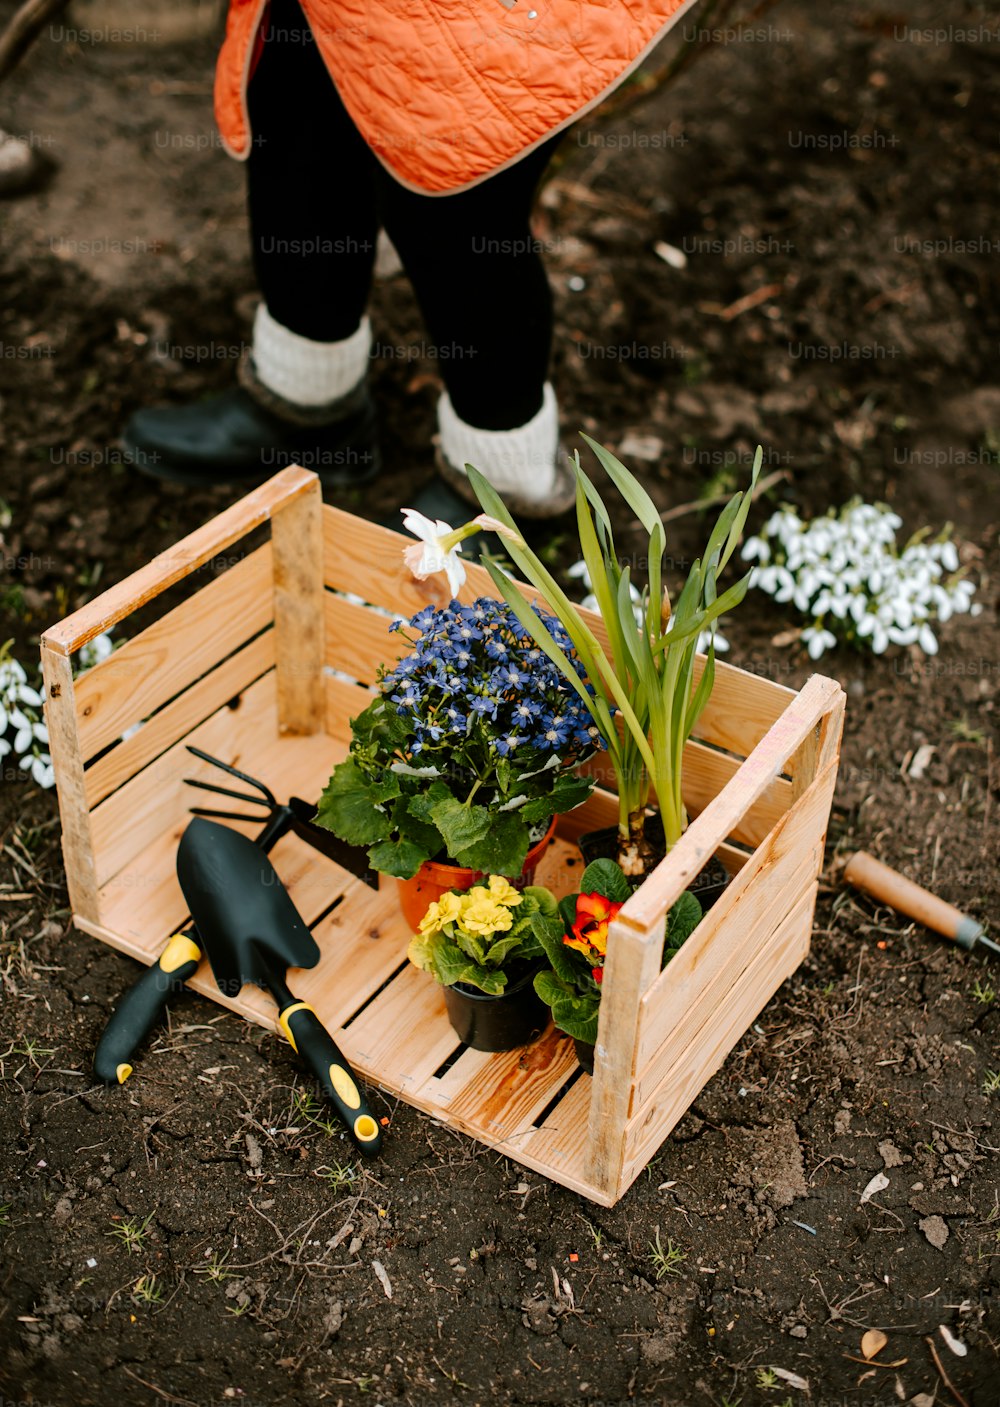 a wooden crate filled with flowers and gardening utensils